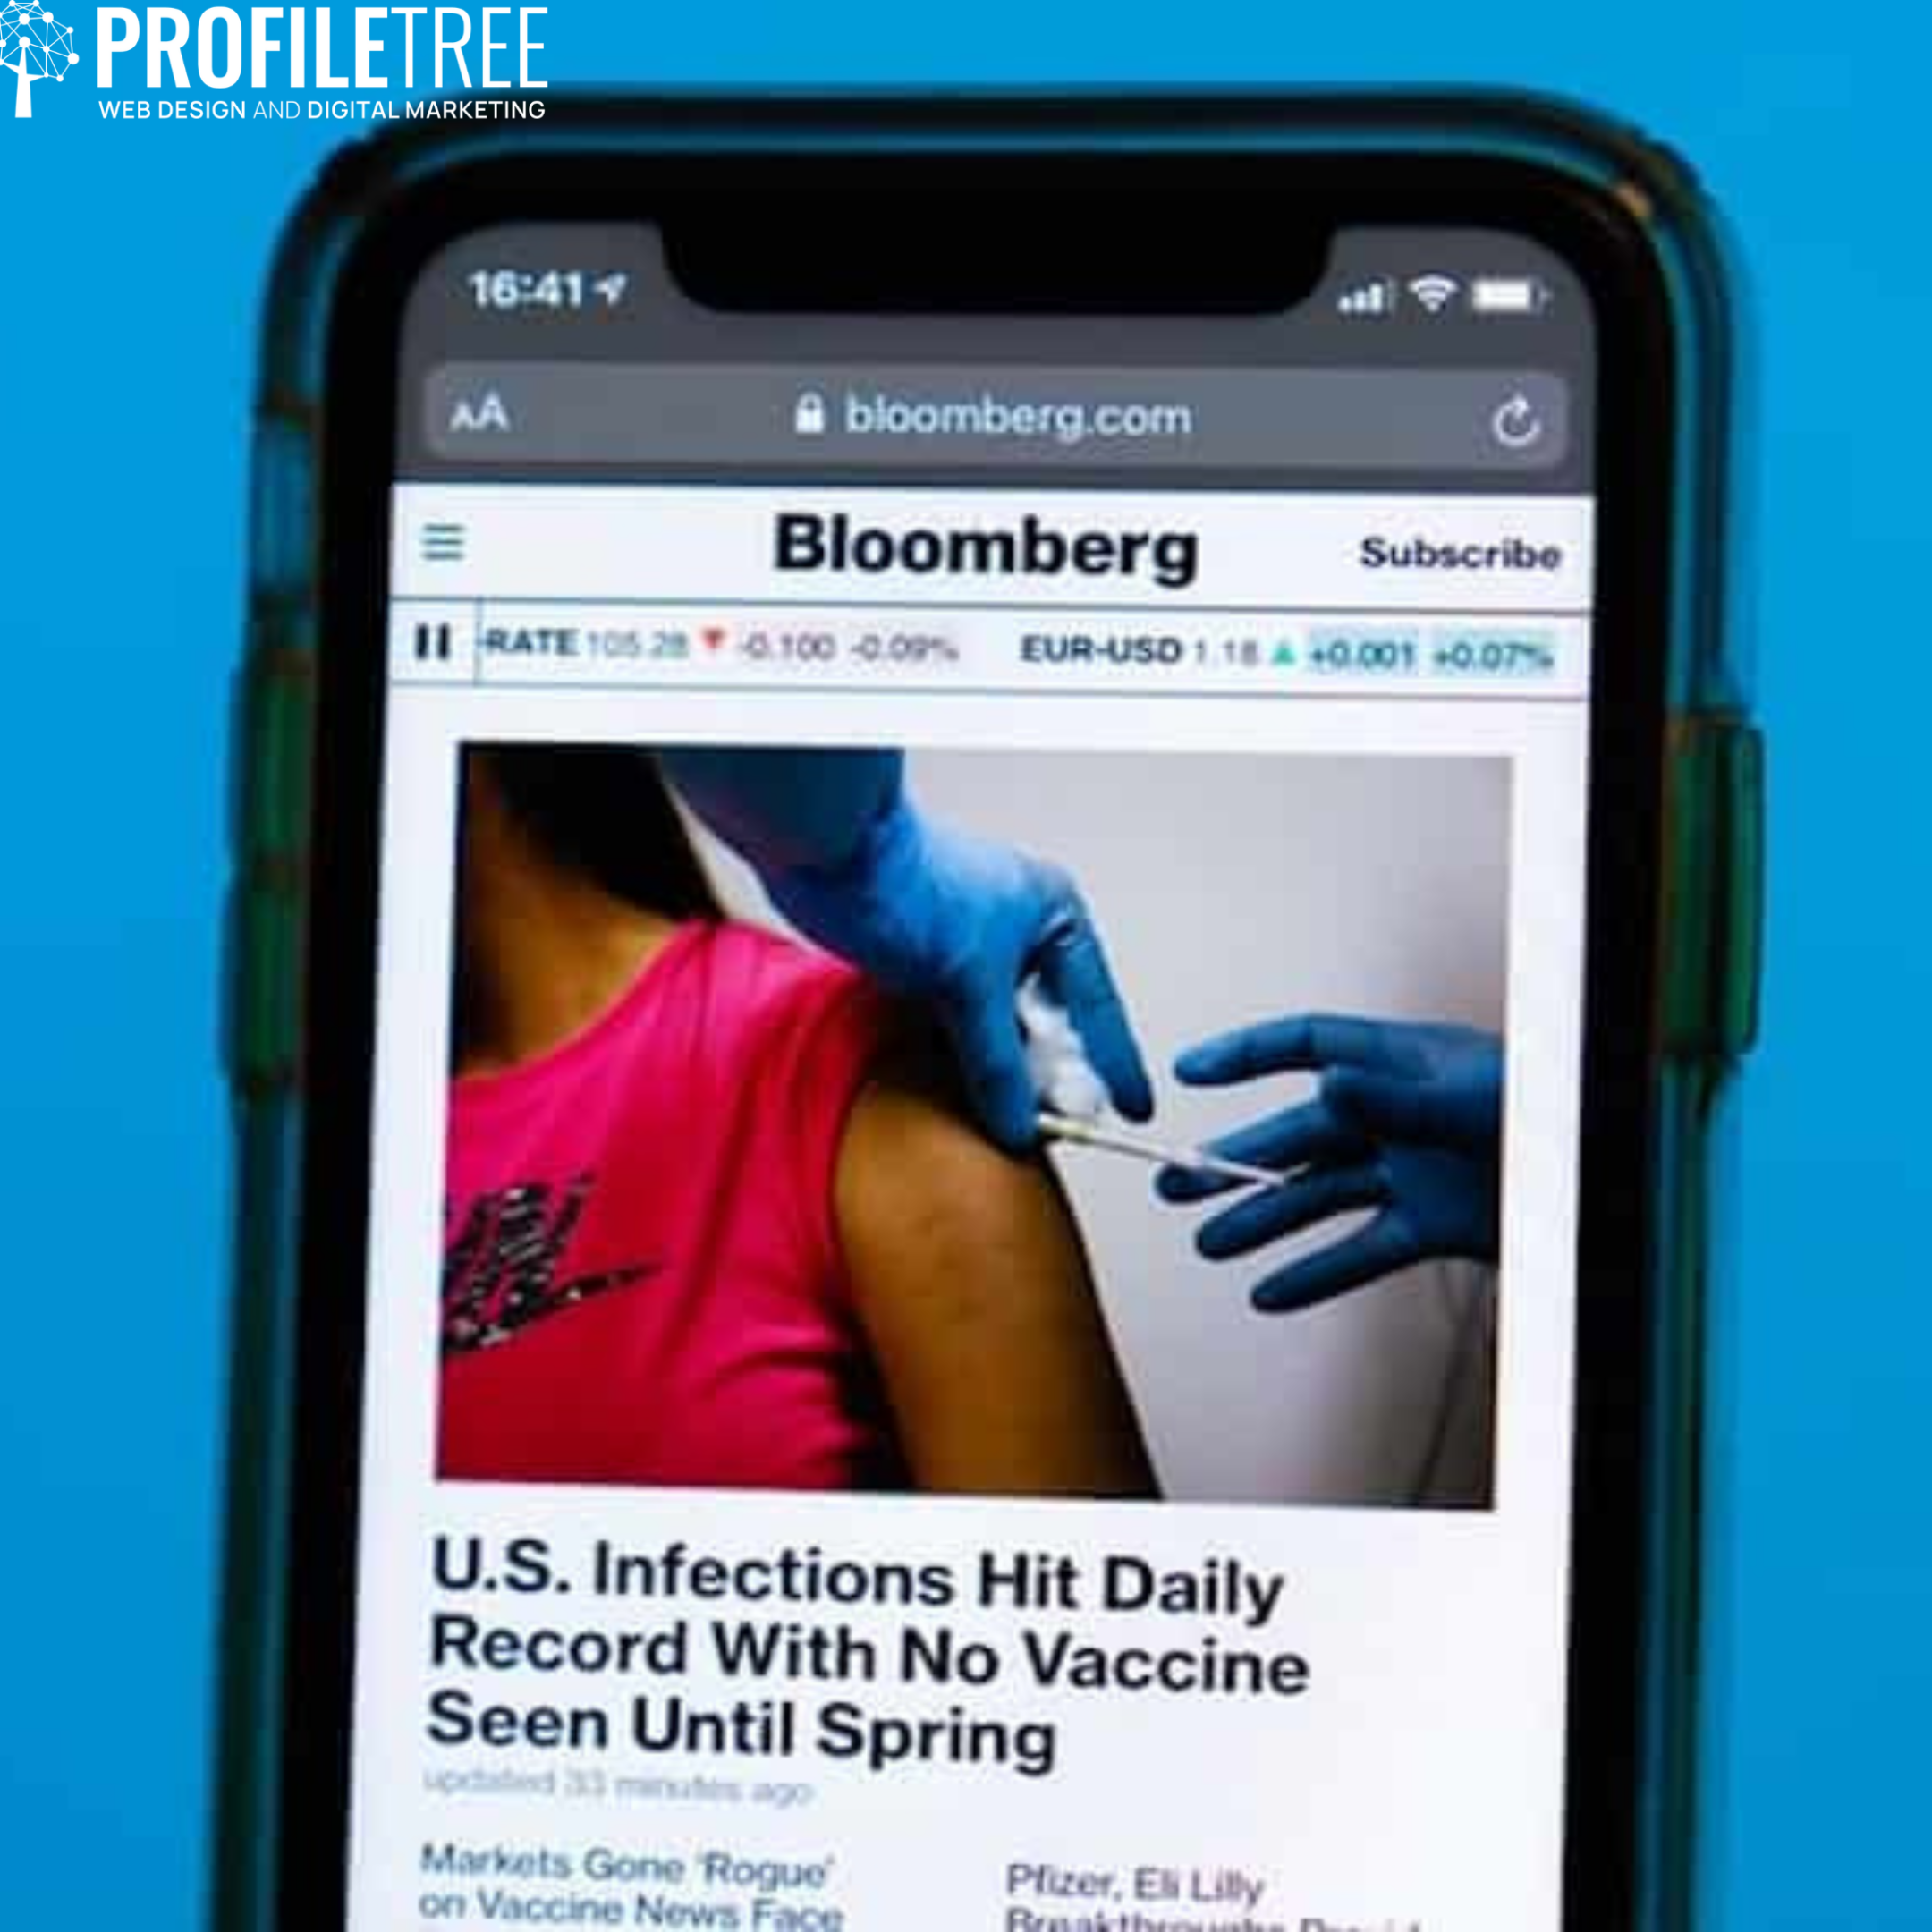 Image of iPhone with Bloomberg news article on it discussing the high levels of COVID-19 infections in the USA